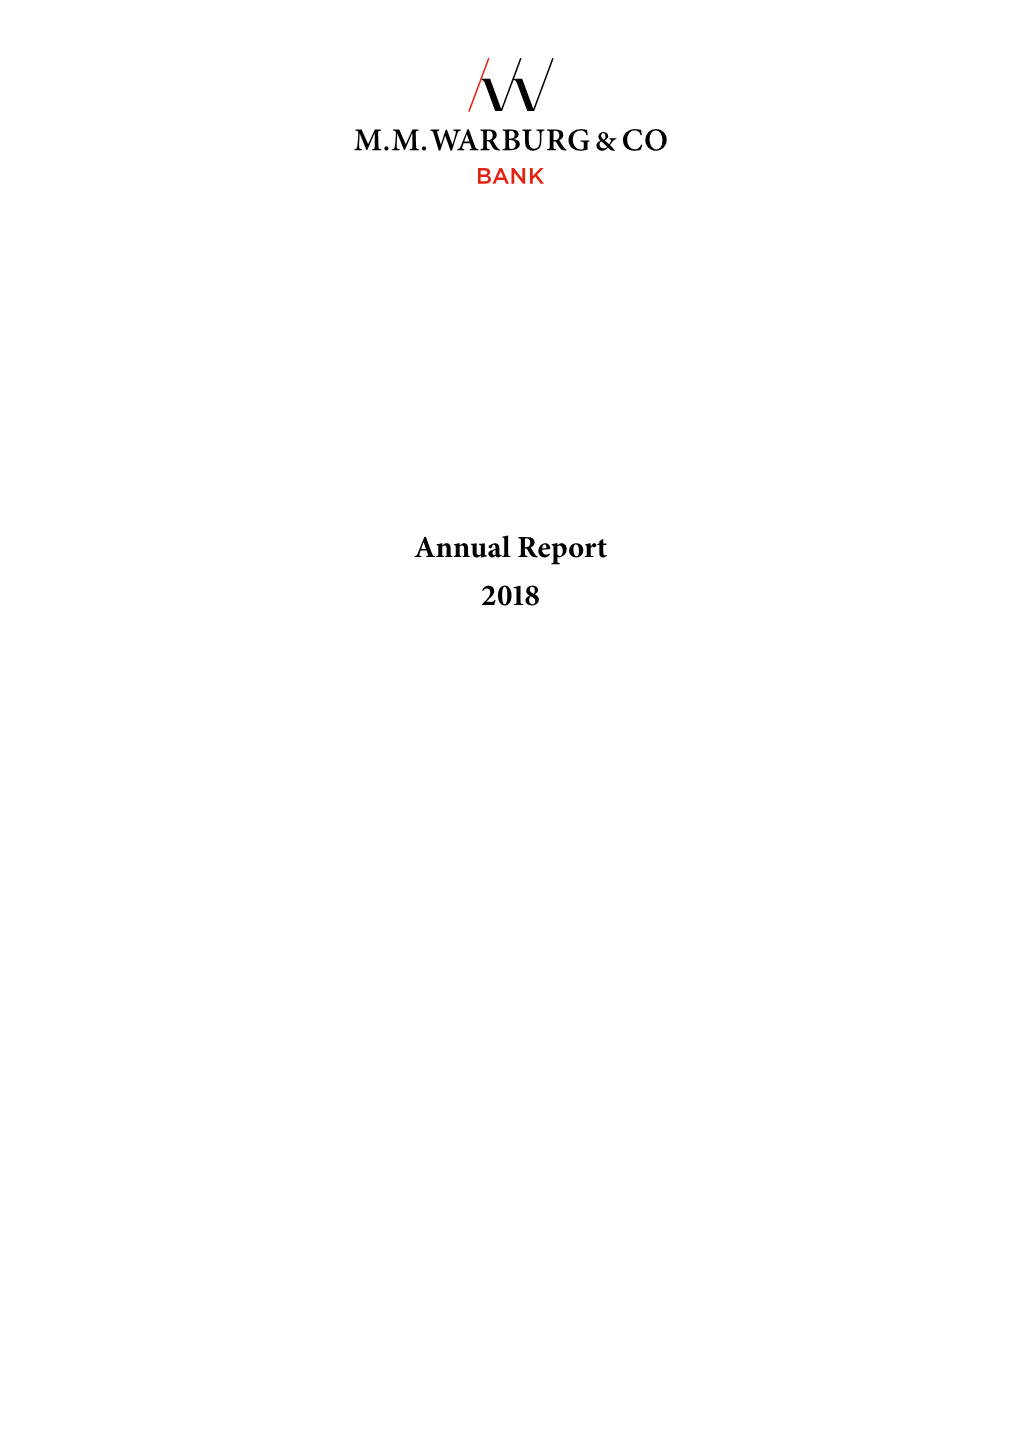 Annual Report 2018 Performance at a Glance